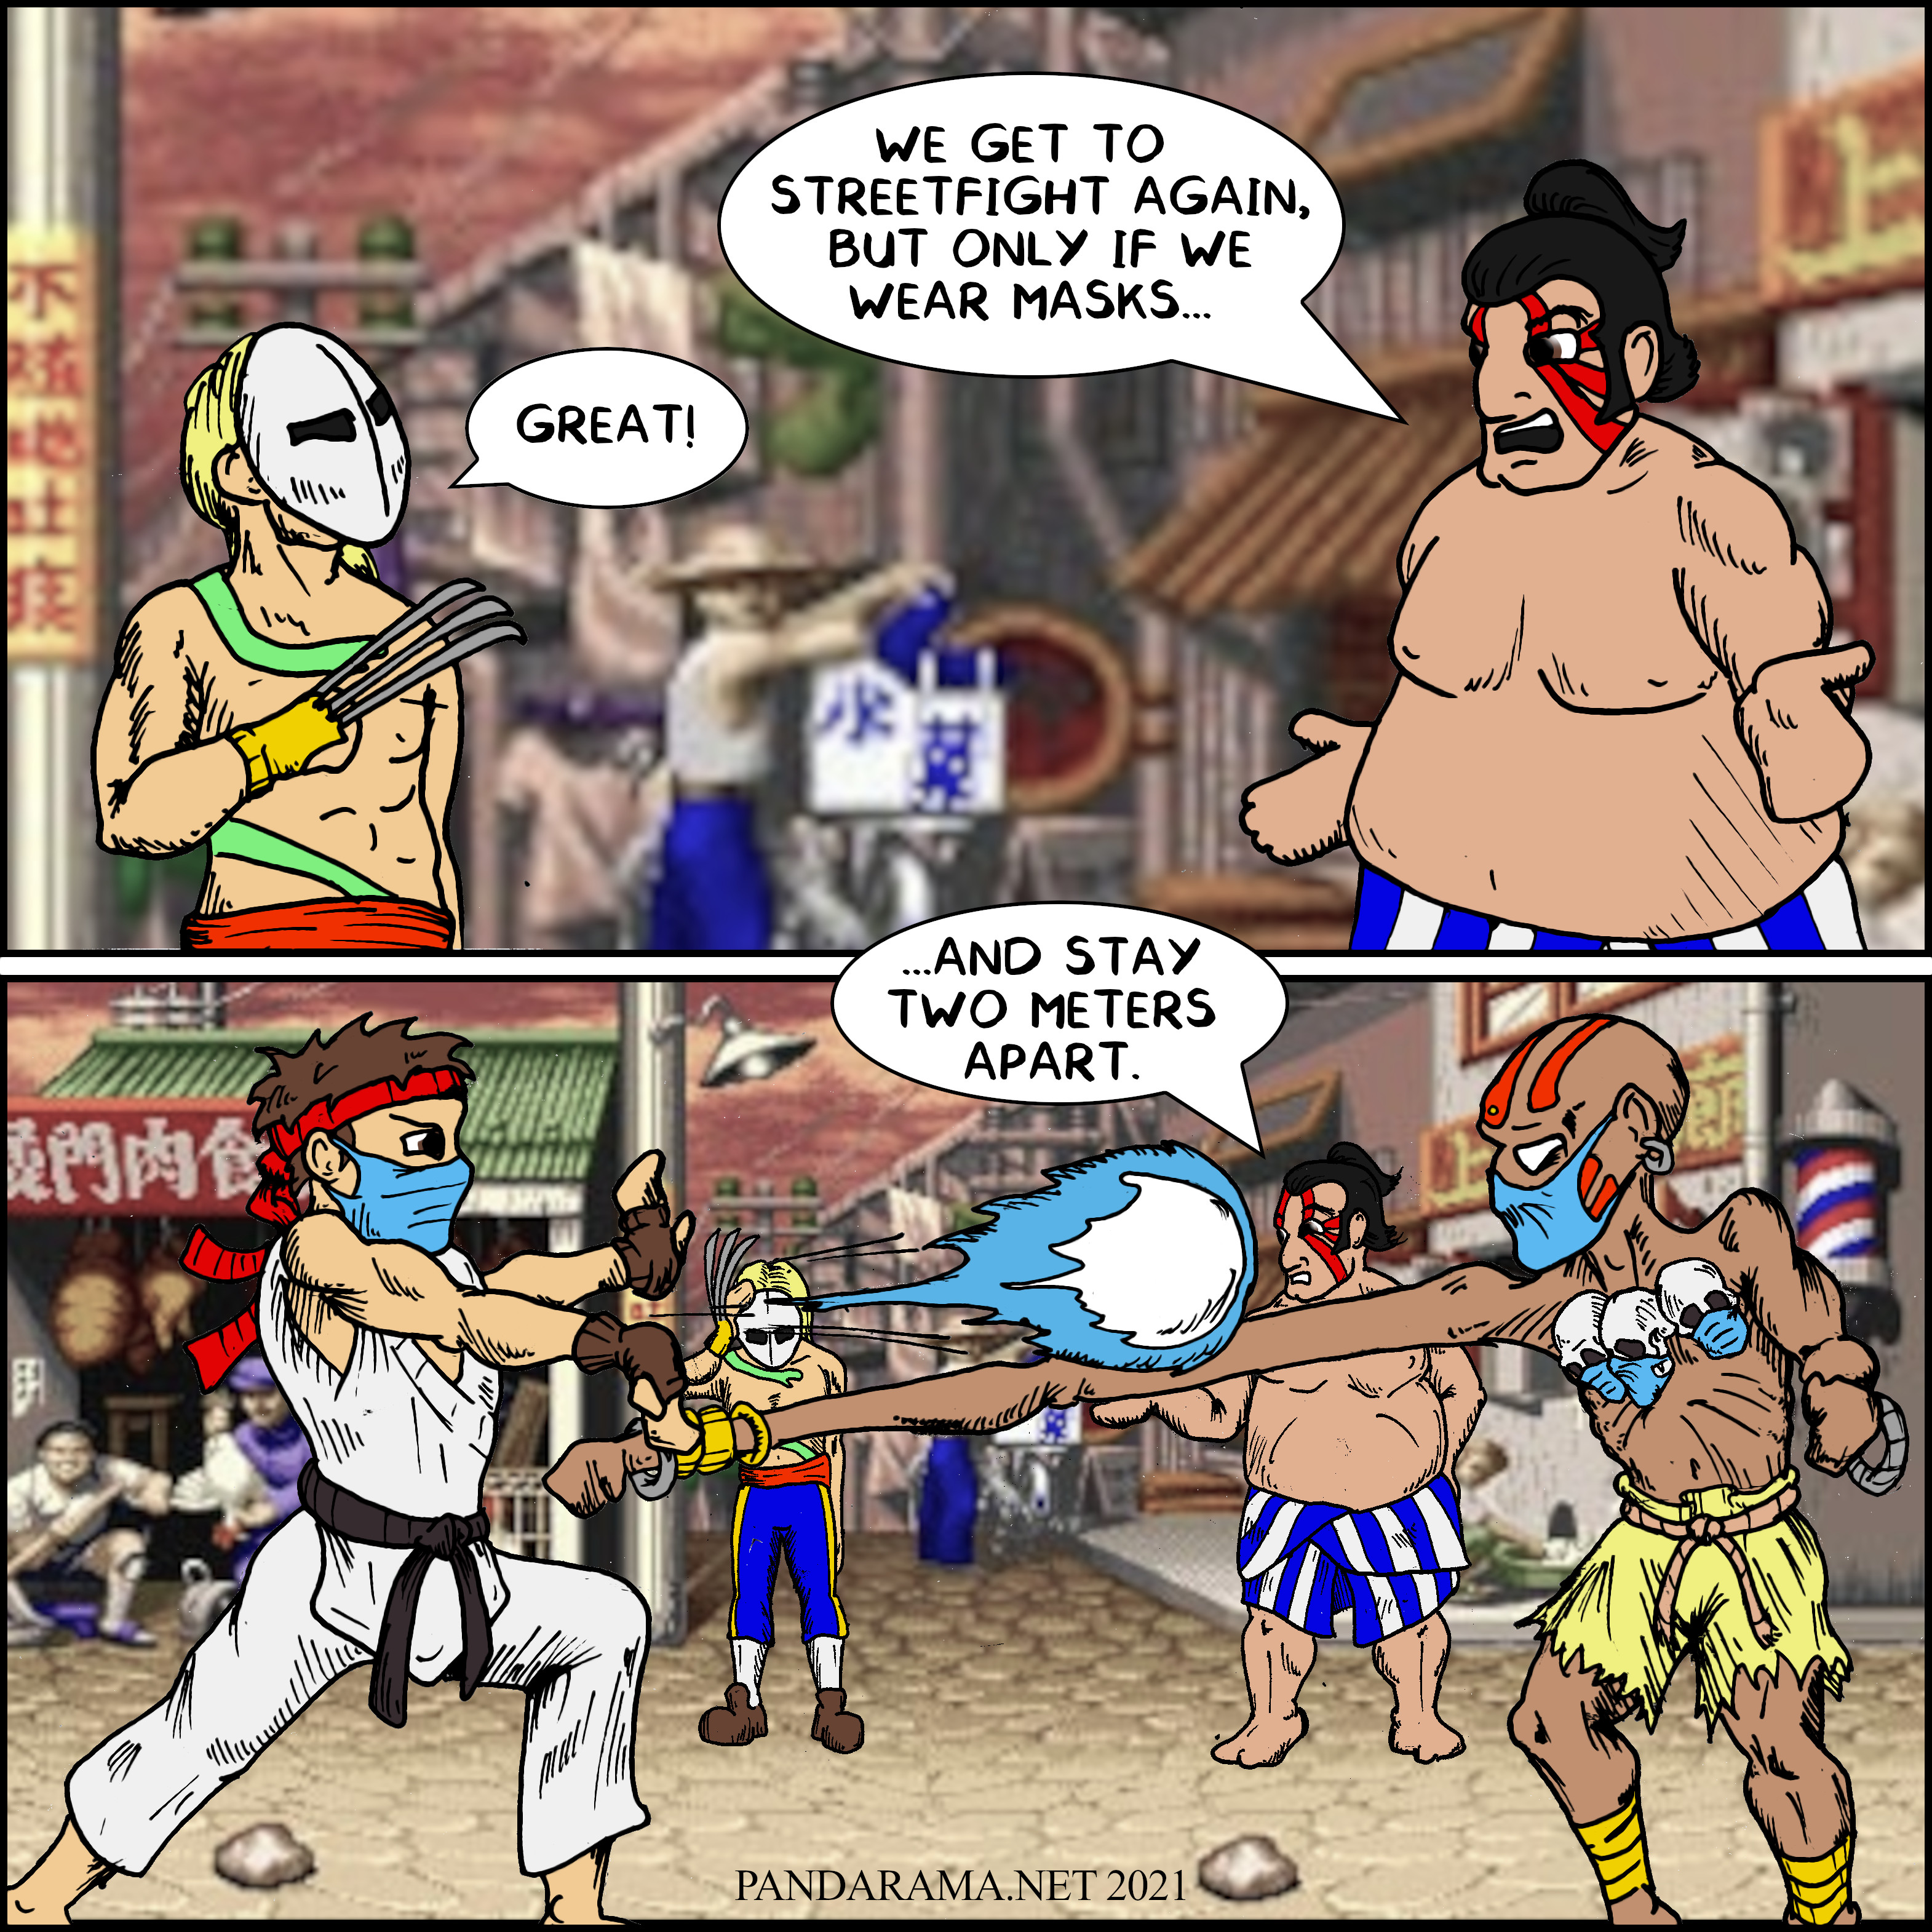 webcomic. During the Covid-19 pandemic, E Honda tells Vega, they can get back to street fighting if they where masks and stay 2 meters apart. reveal Ryu throwing Hadouken at Dhalsim who is kicking with stretchy leg.